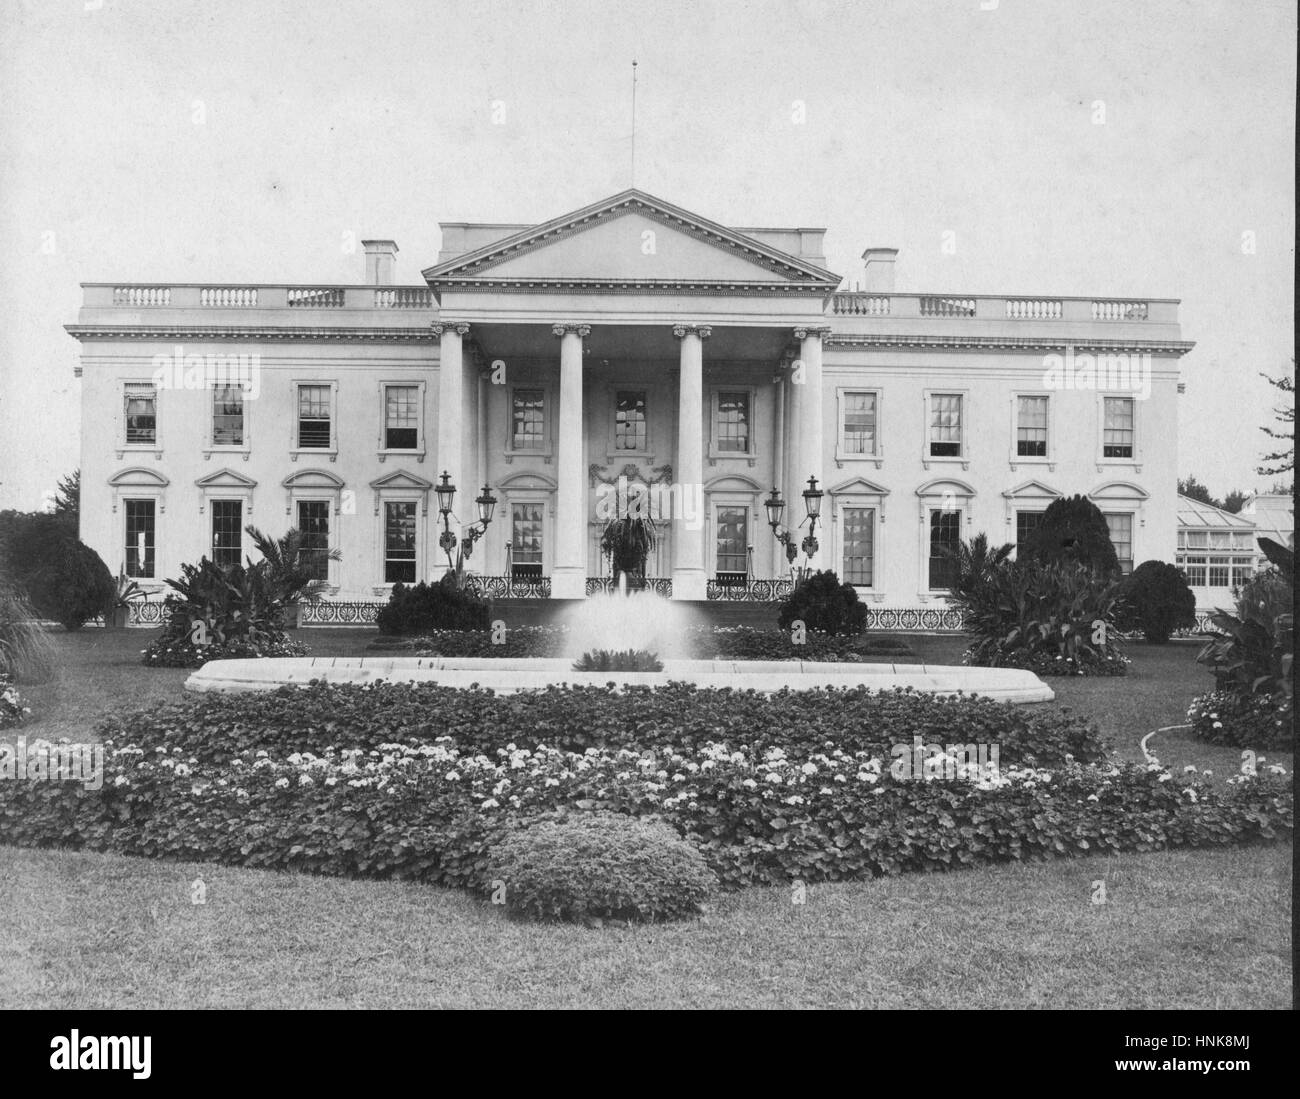 'The White House' c. 1898, at 1600 Pennsylvania Ave. NW.  This is the north side of this American icon, facing Pennsylvania Ave.  Note the Conservatory at the right end of the building. This was replaced by the brand new West Wing in 1902.  No flag on the flag pole. Note the fancy old style of iron fence on the porch. The photo was taken by Mr. J.F. Jarvis, whose studio was at 135 Pennsylvania Ave.  Jarvis had been taking other photos of the White House for decades, both inside and out.   To see my other Places-related vintage images, Search:  Prestor  vintage  places Stock Photo